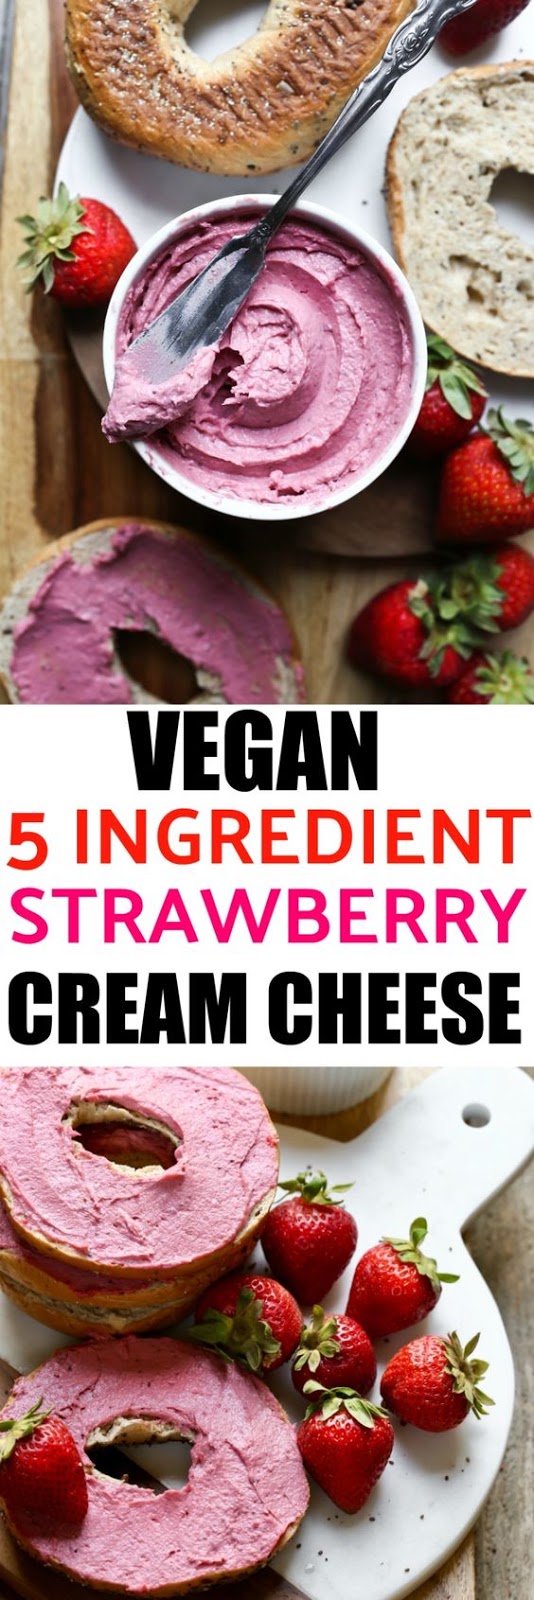 Vegan Strawberry Cream Cheese that is just 5 ingredients, takes 10 minutes to make and is incredibly rich in flavor! Made from freeze-dried strawberries, cashew butter, yogurt and lemon juice. You will love this thick, creamy and firm dairy-free cream cheese!